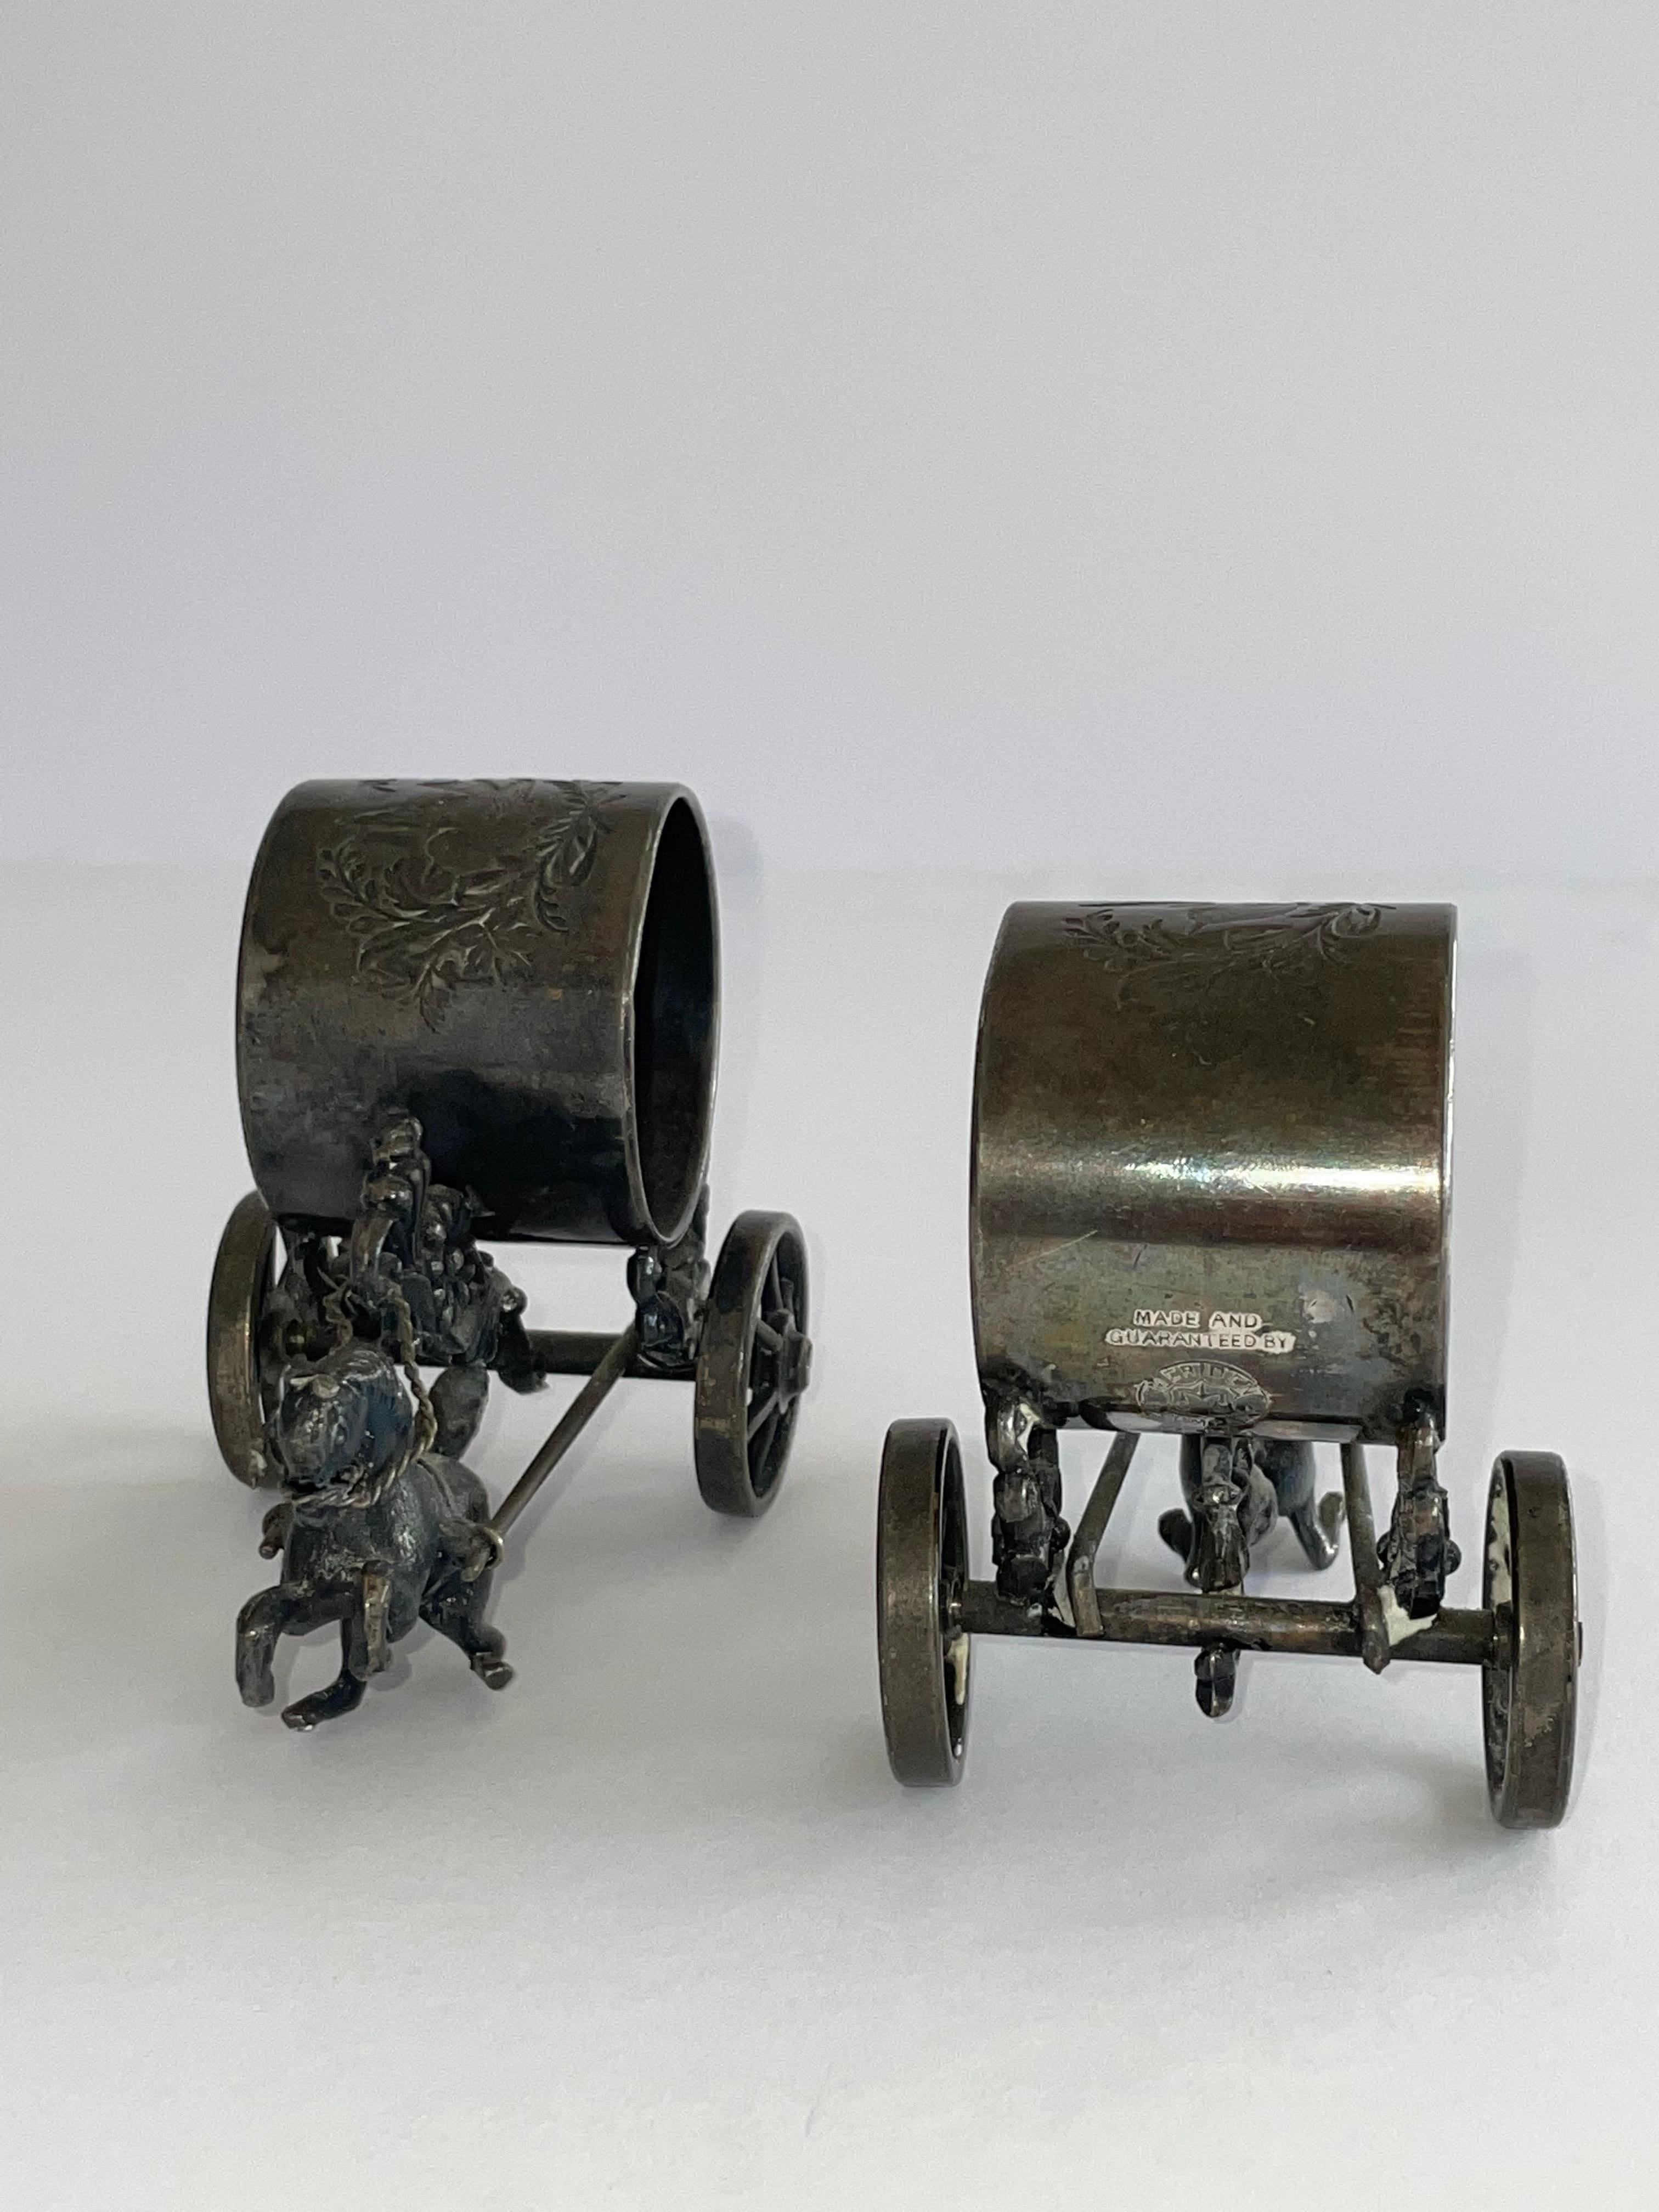 Early Victorian Seeing Double! Rare Meriden Carriage Napkin Holder Set For Sale